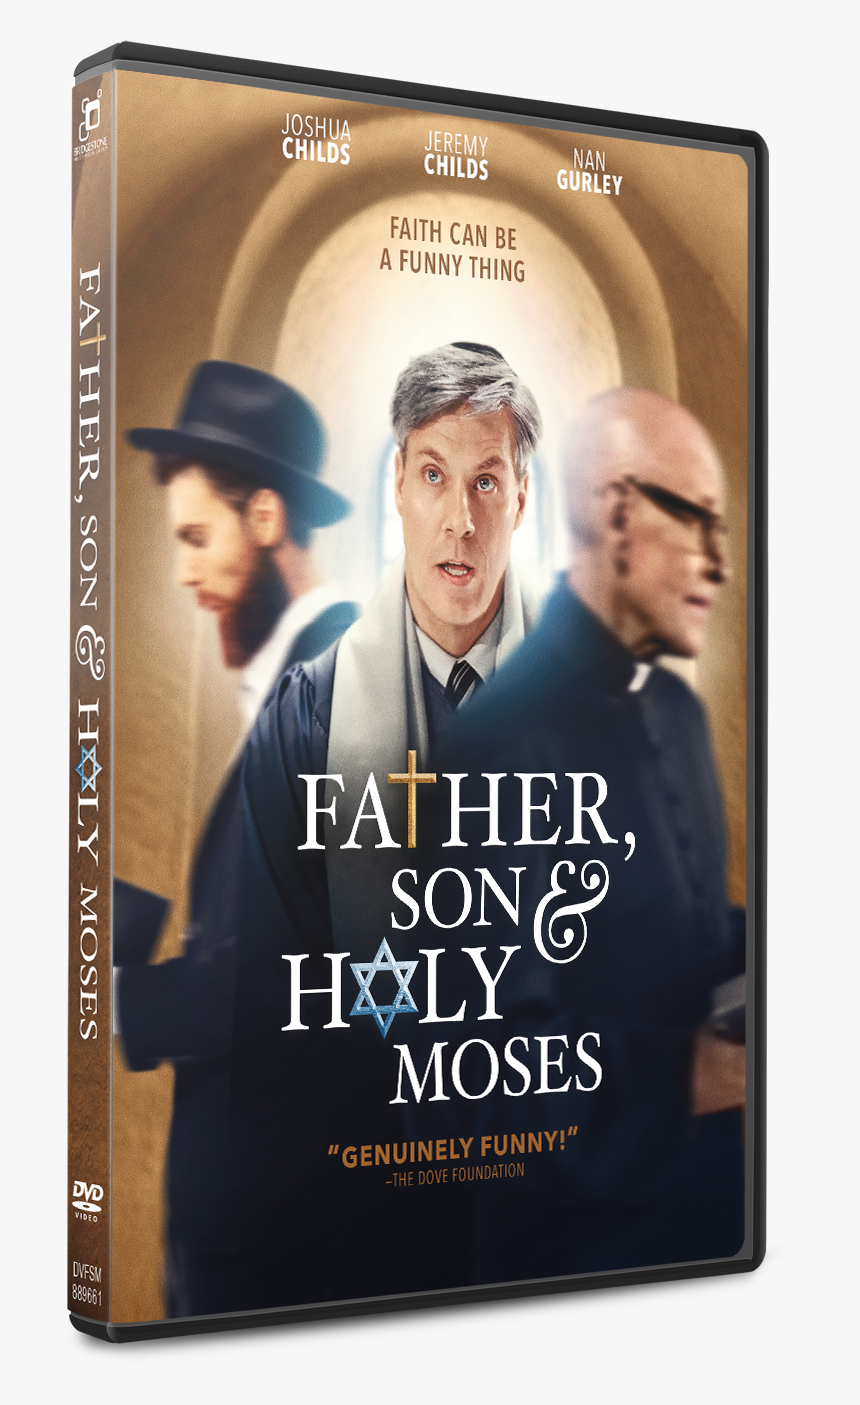 Dvd , Png Download - Father Son And Holy Moses, Transparent Png, Free Download